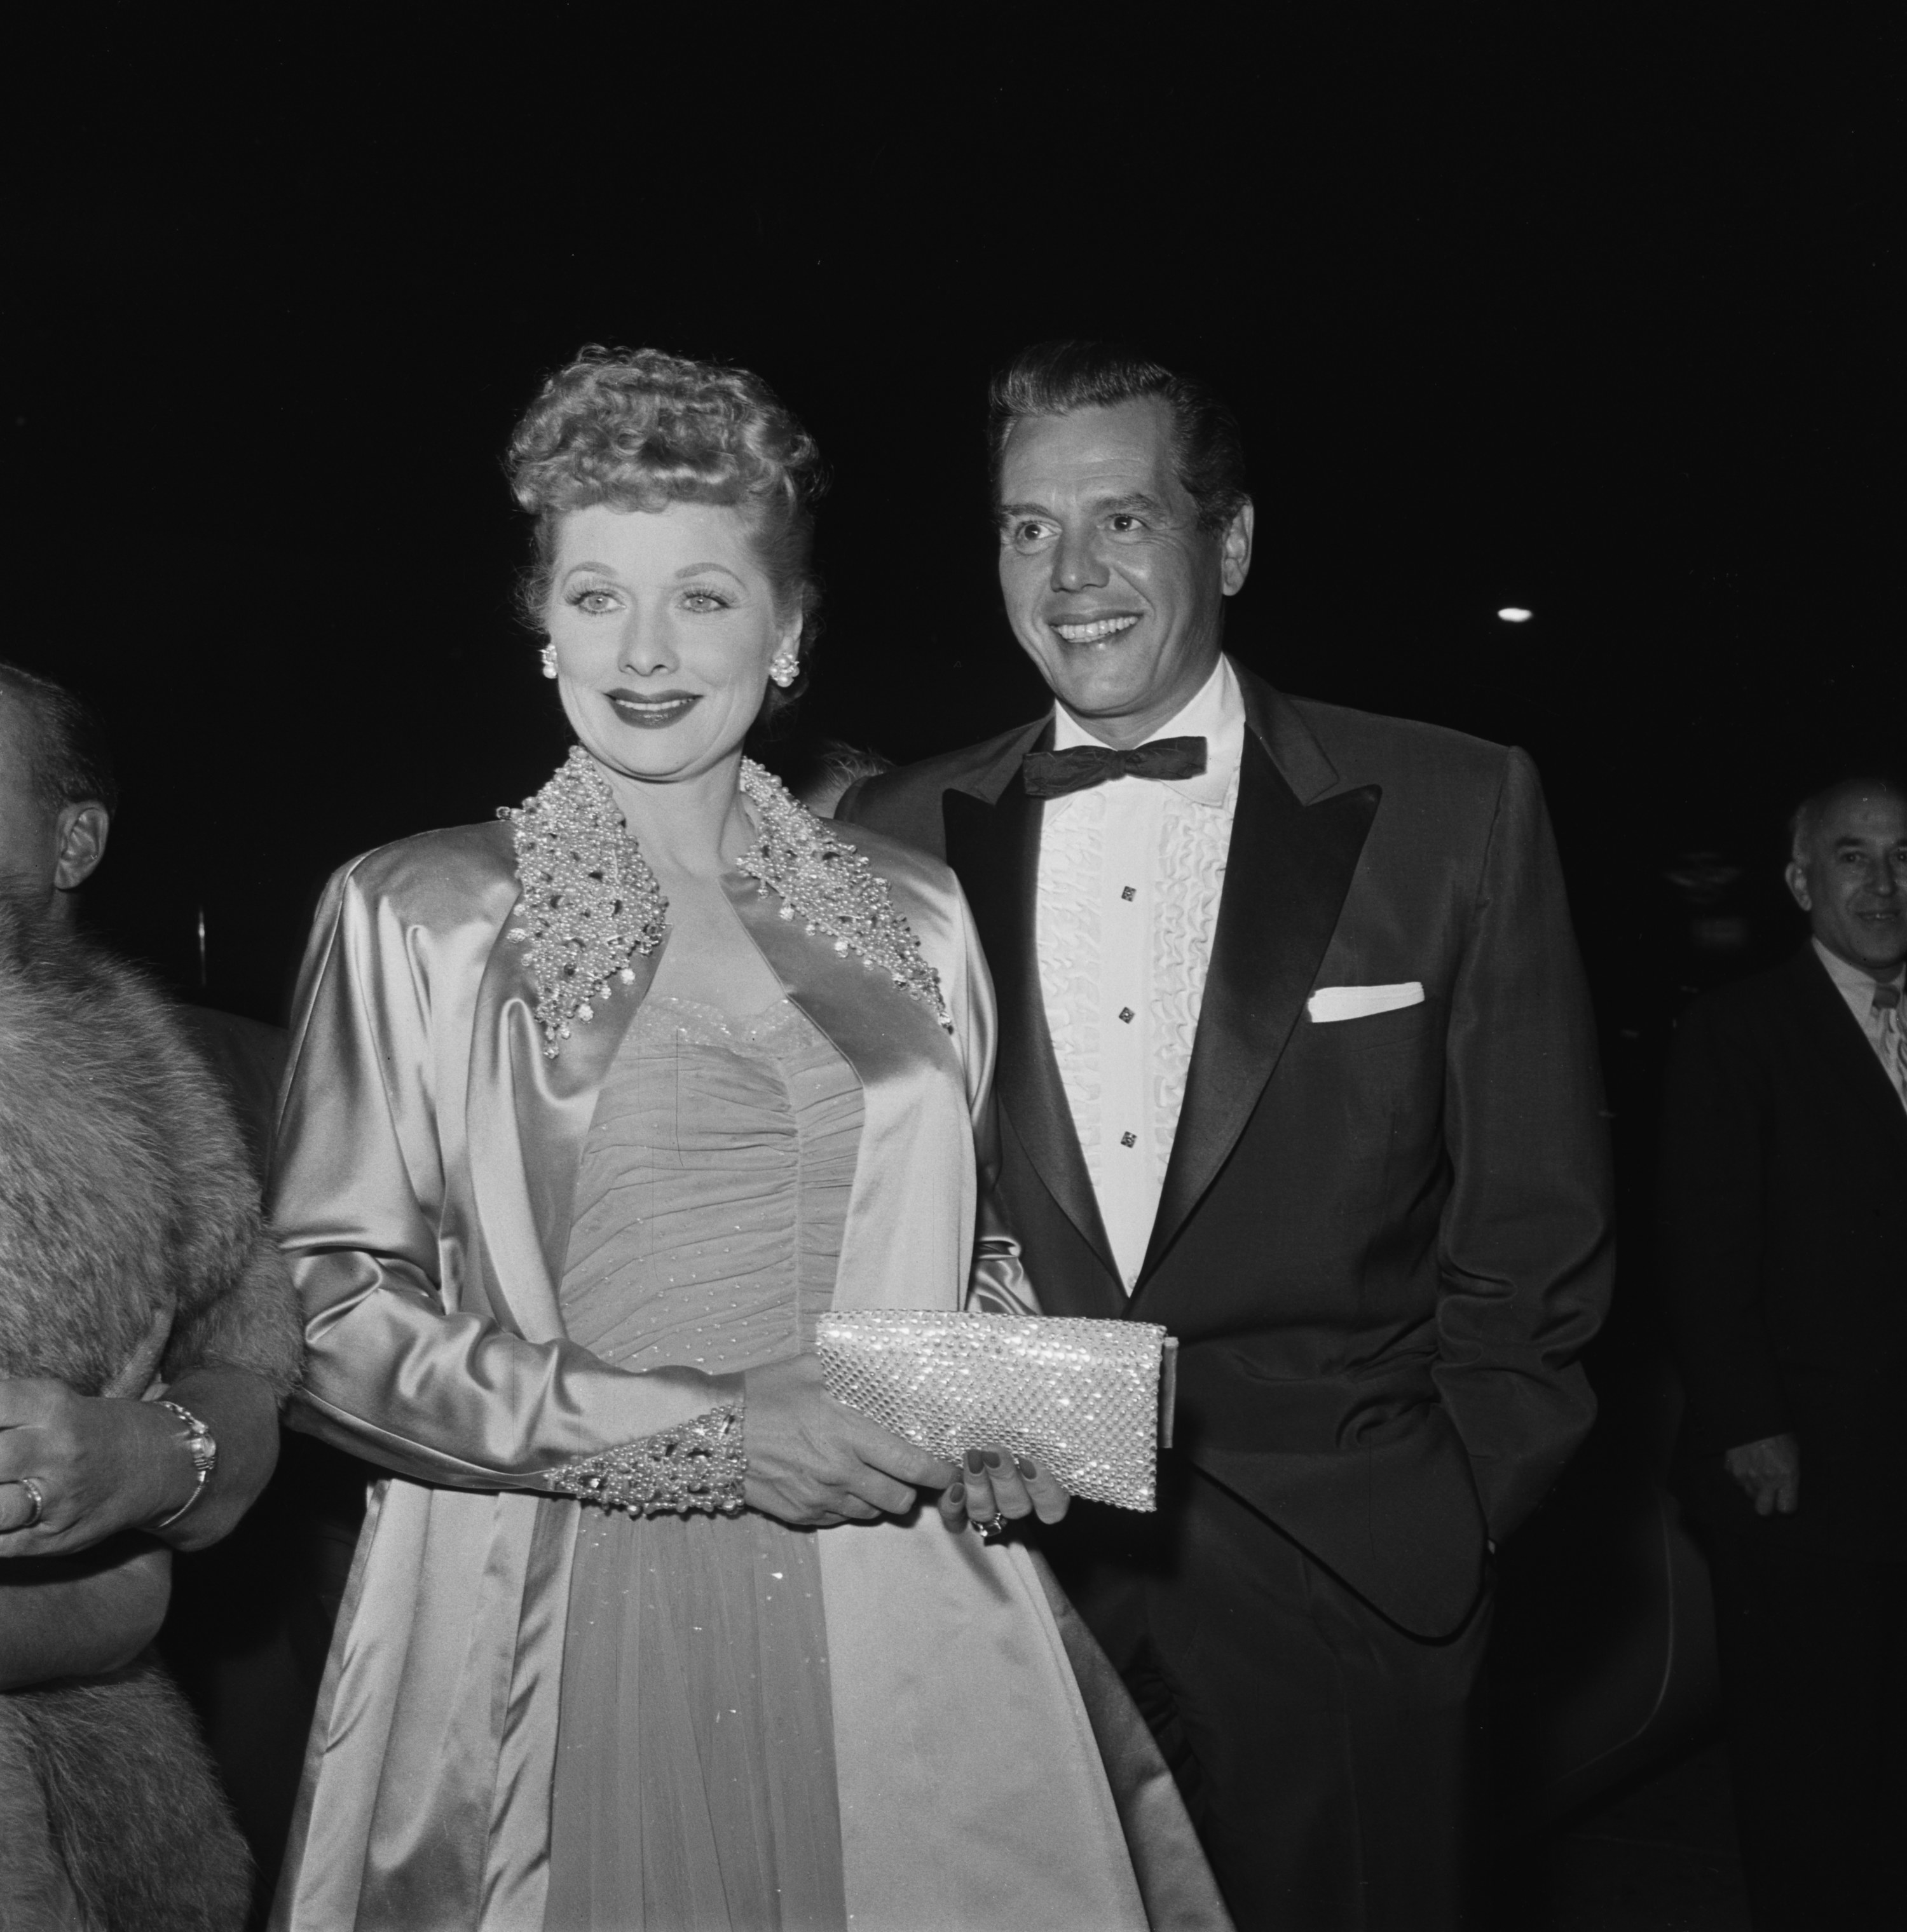 Lucille Ball and Desi Arnaz arrive at a gathering in 1955